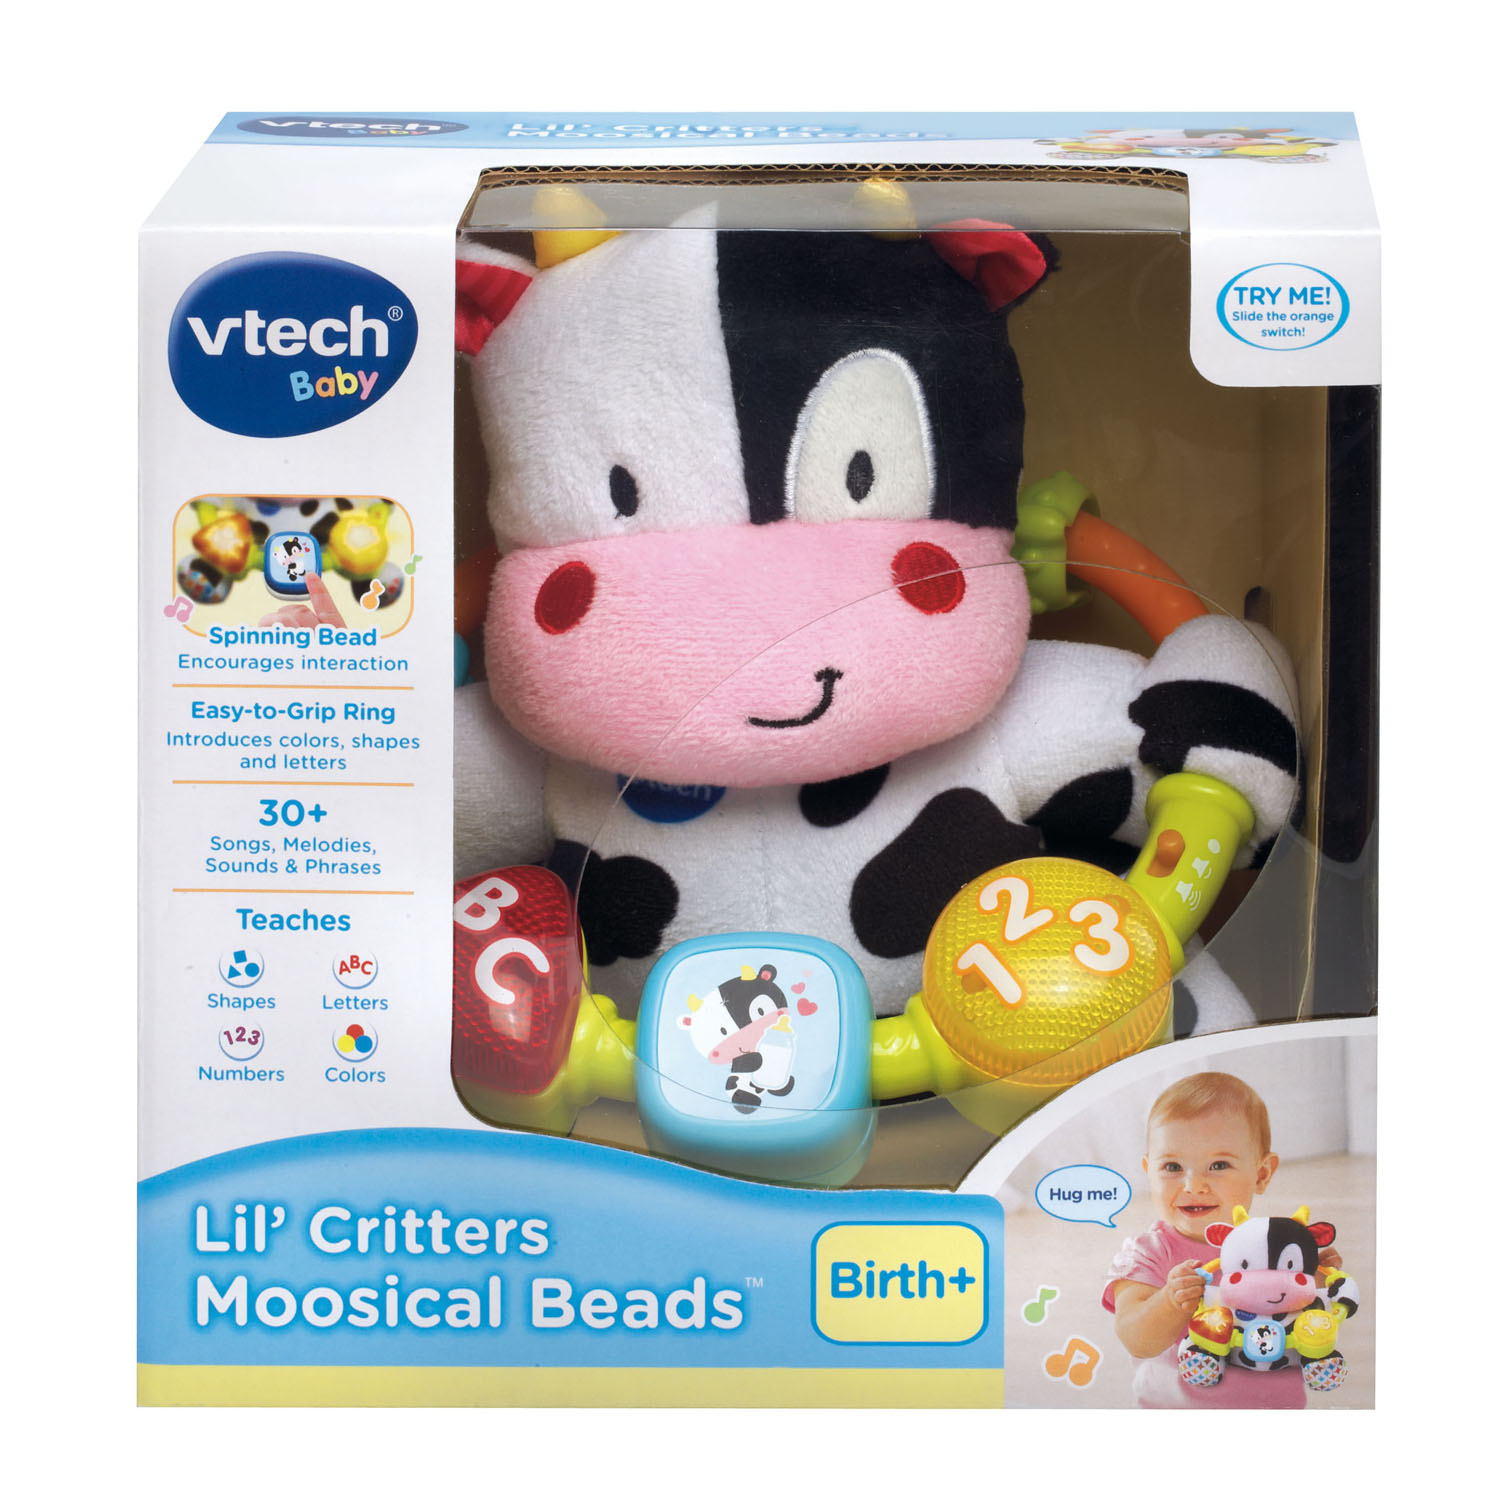 VTech Lil' Critters Moosical Beads, Plush Cow, Musical Baby Toy - image 5 of 7